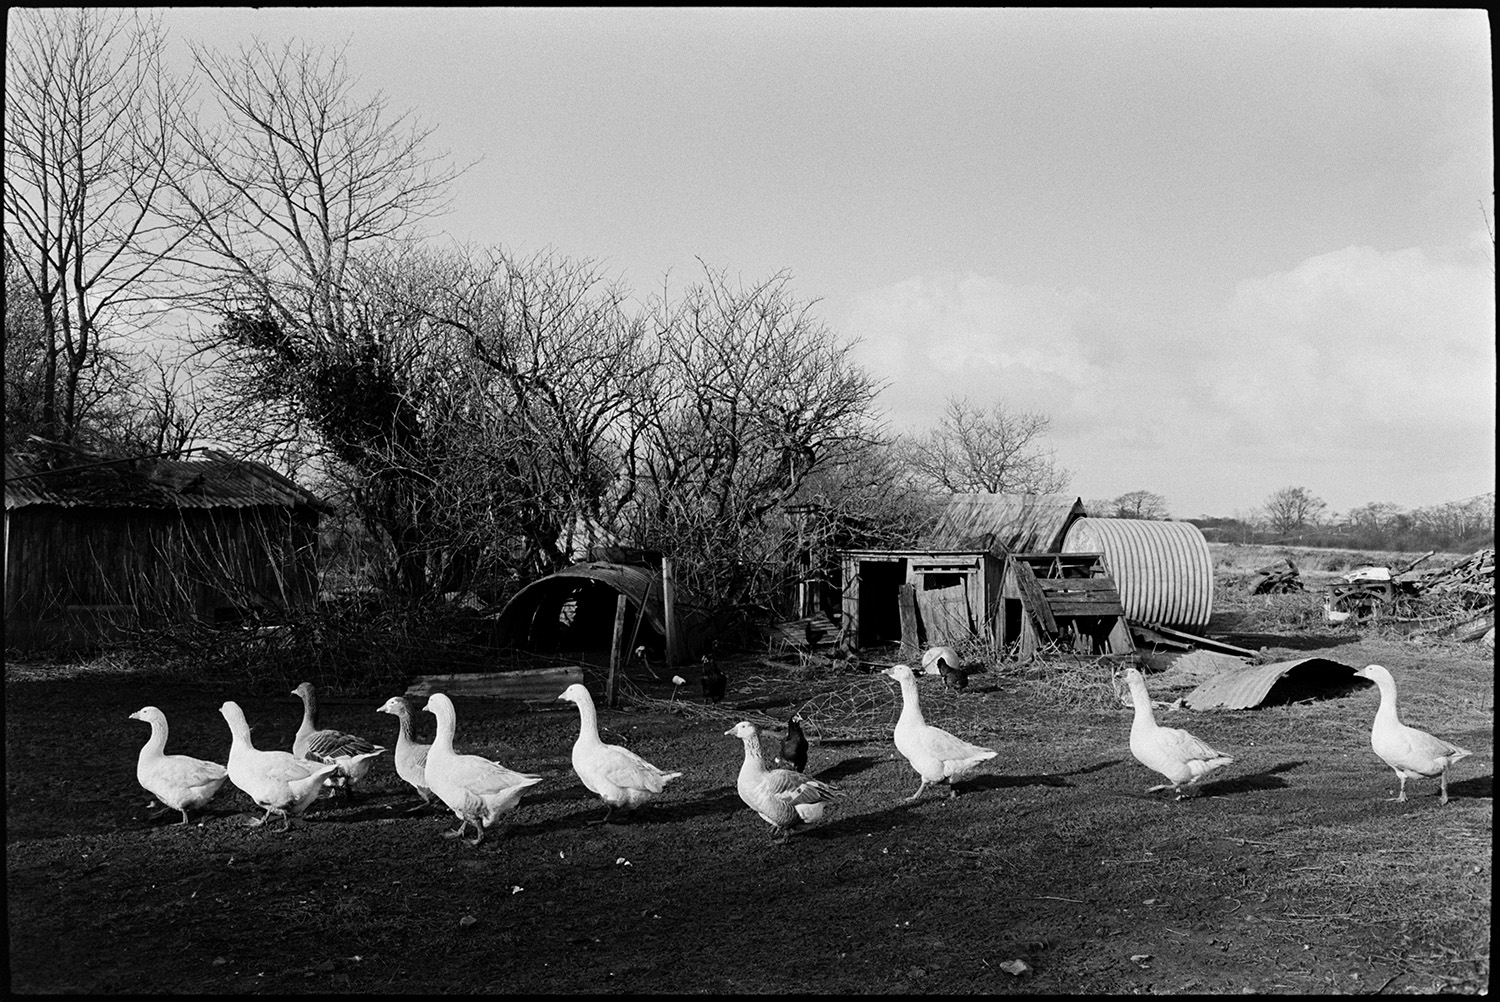 Mucky farmyard, geese, cows, mud, snowdrops in old orchard, tractor. 
[Geese walking through a field with wooden sheds and sheets of corrugated iron at Cuppers Piece, Beaford.]